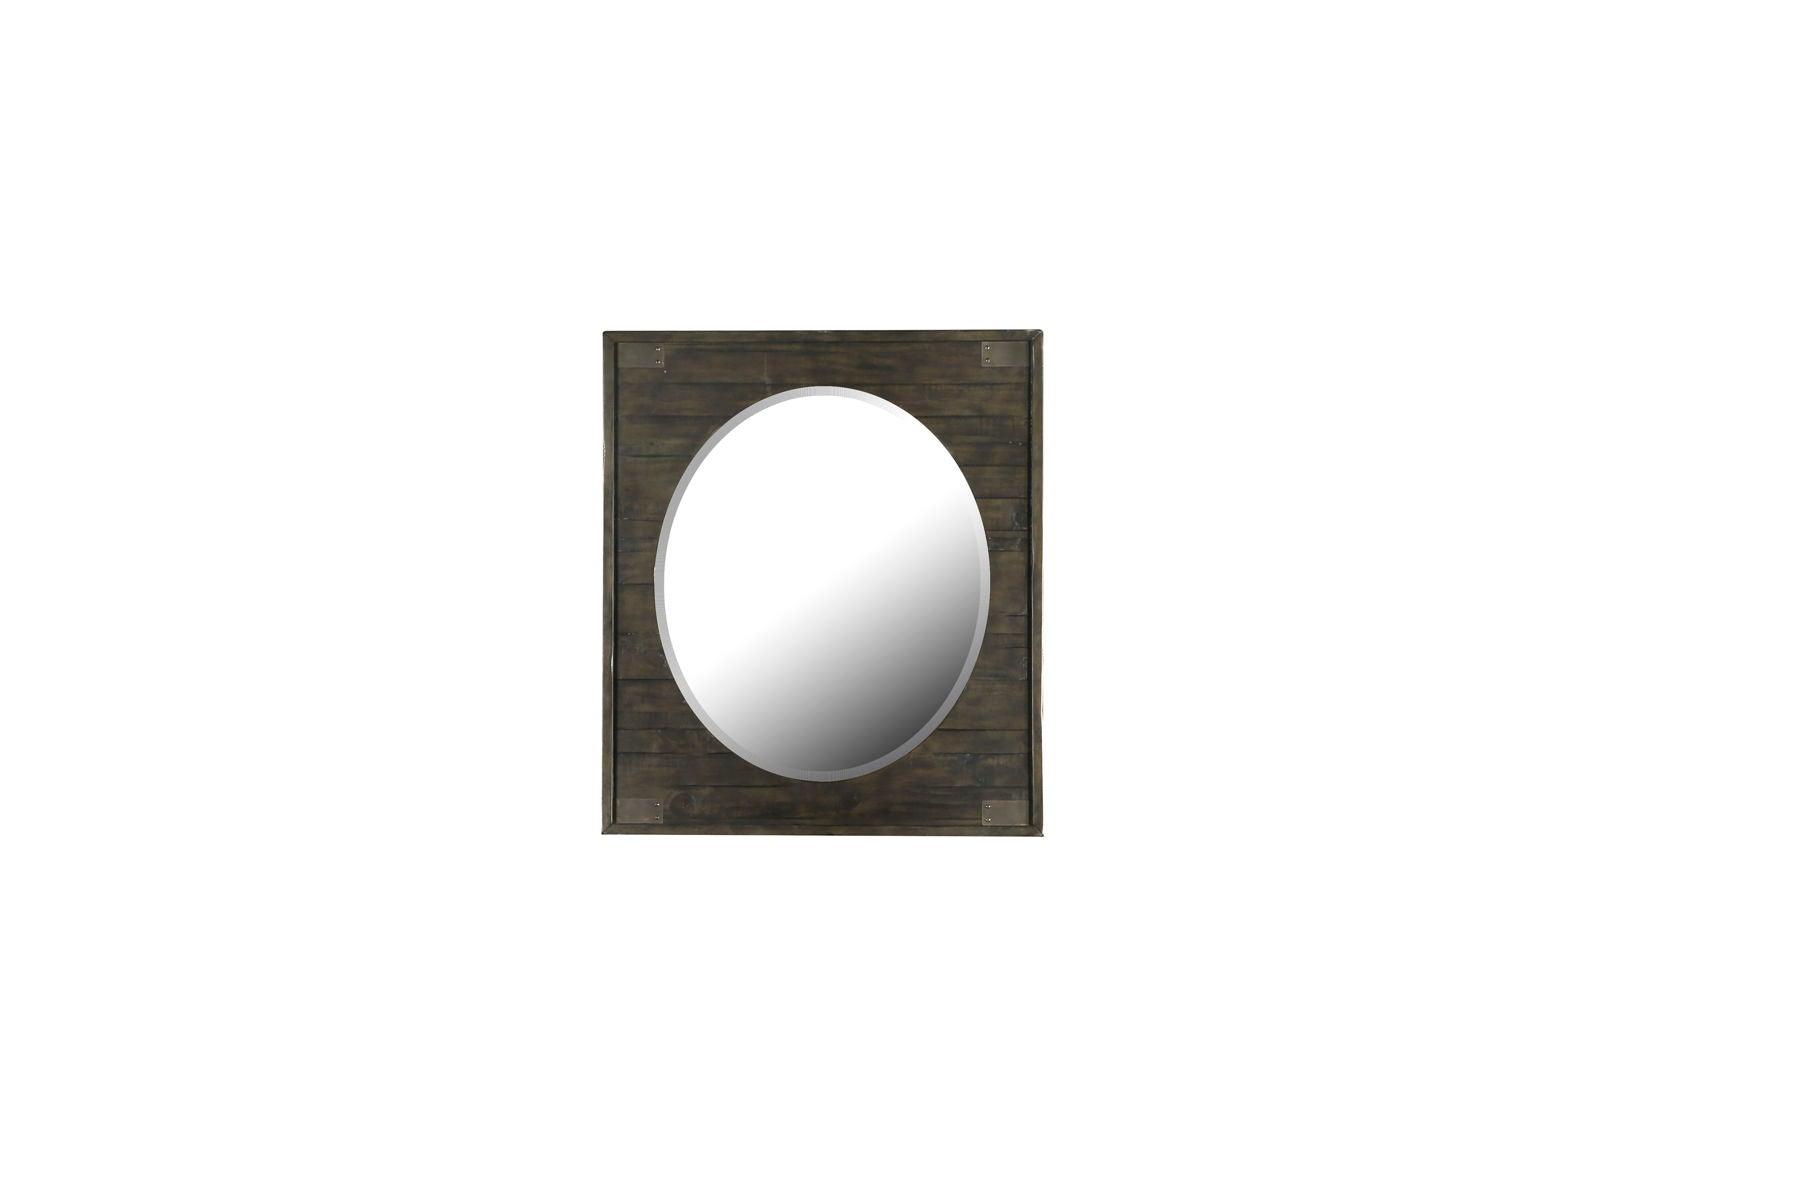 Magnussen Furniture - Abington - Portrait Oval Mirror - Weathered Charcoal - 5th Avenue Furniture